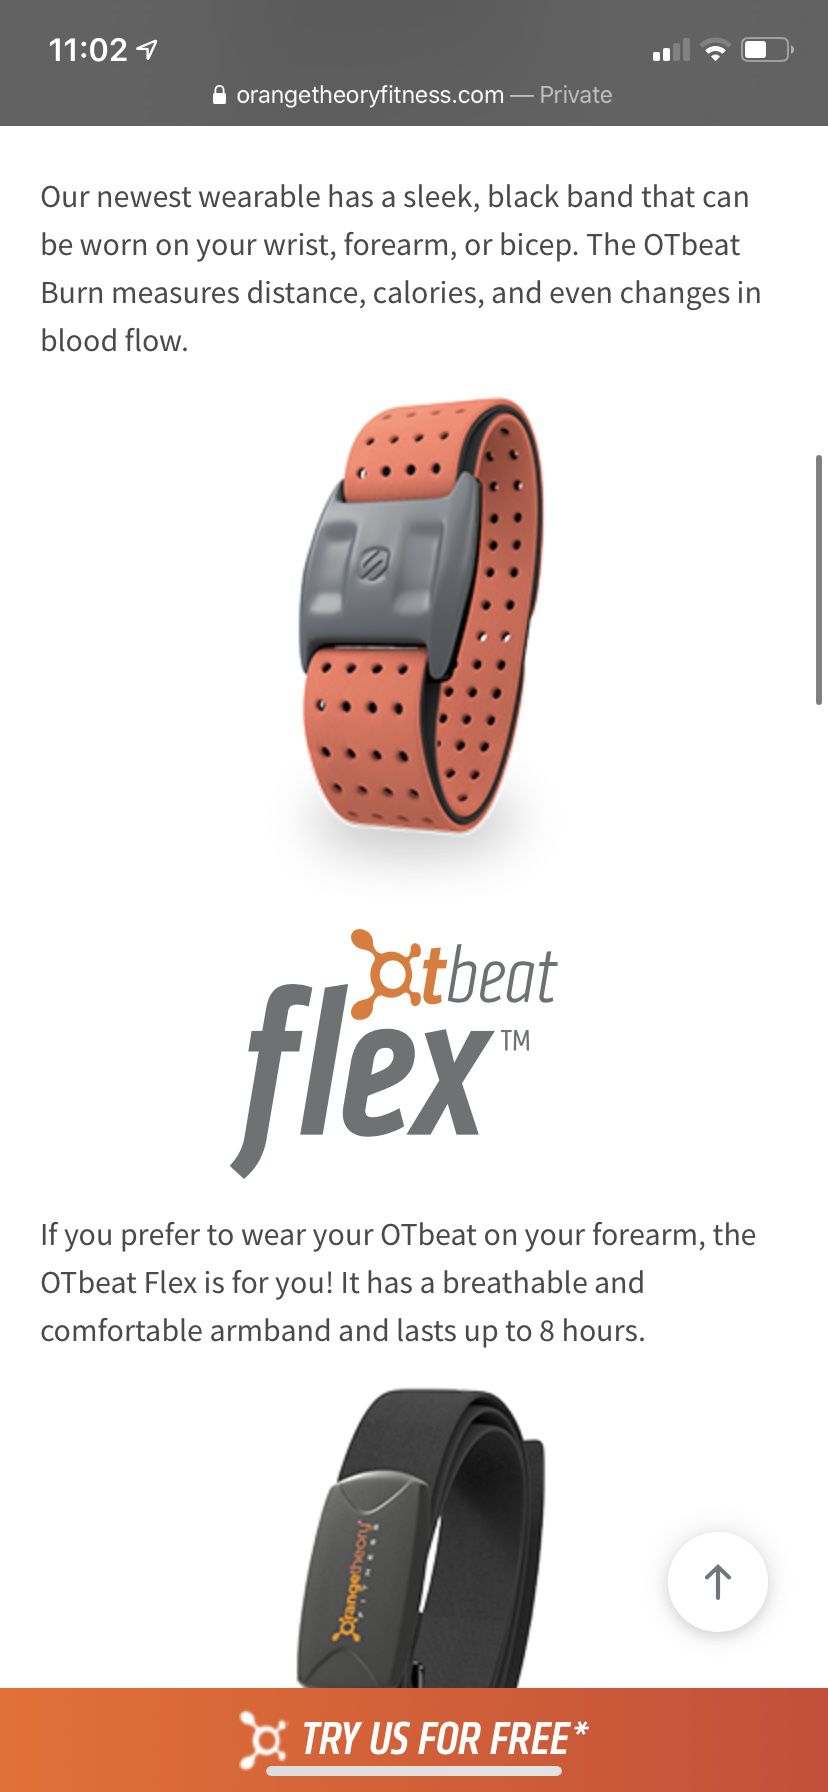 Orange theory fitness heart rate monitor, workout tracking device